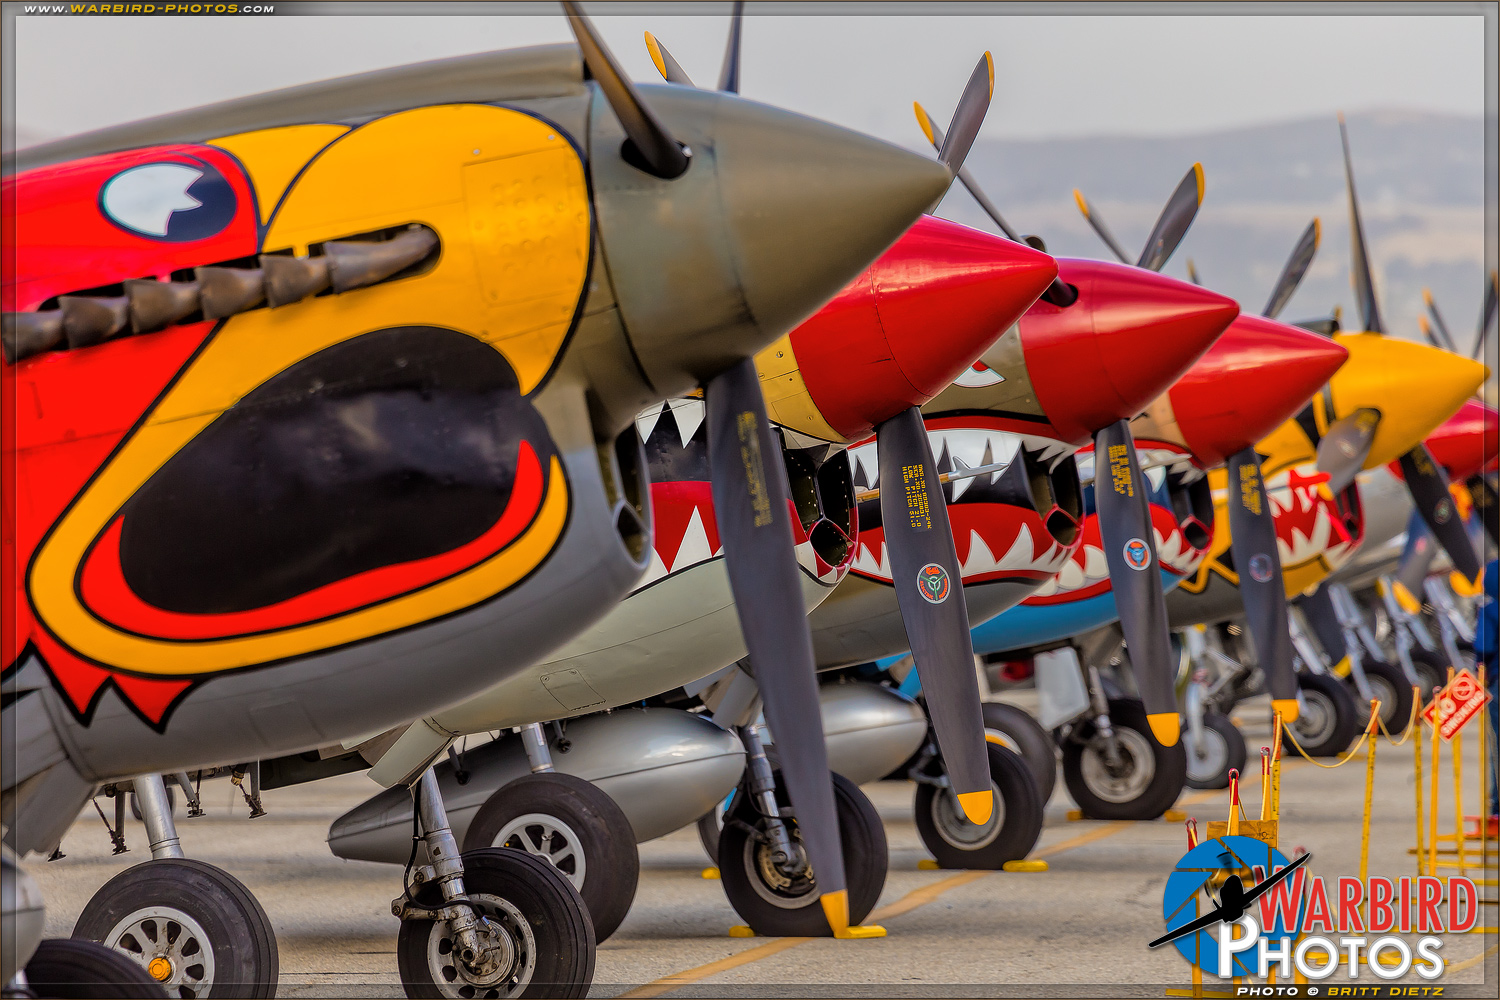 Planes of Fame Airshow 2016 - April 29-May 1, 2016